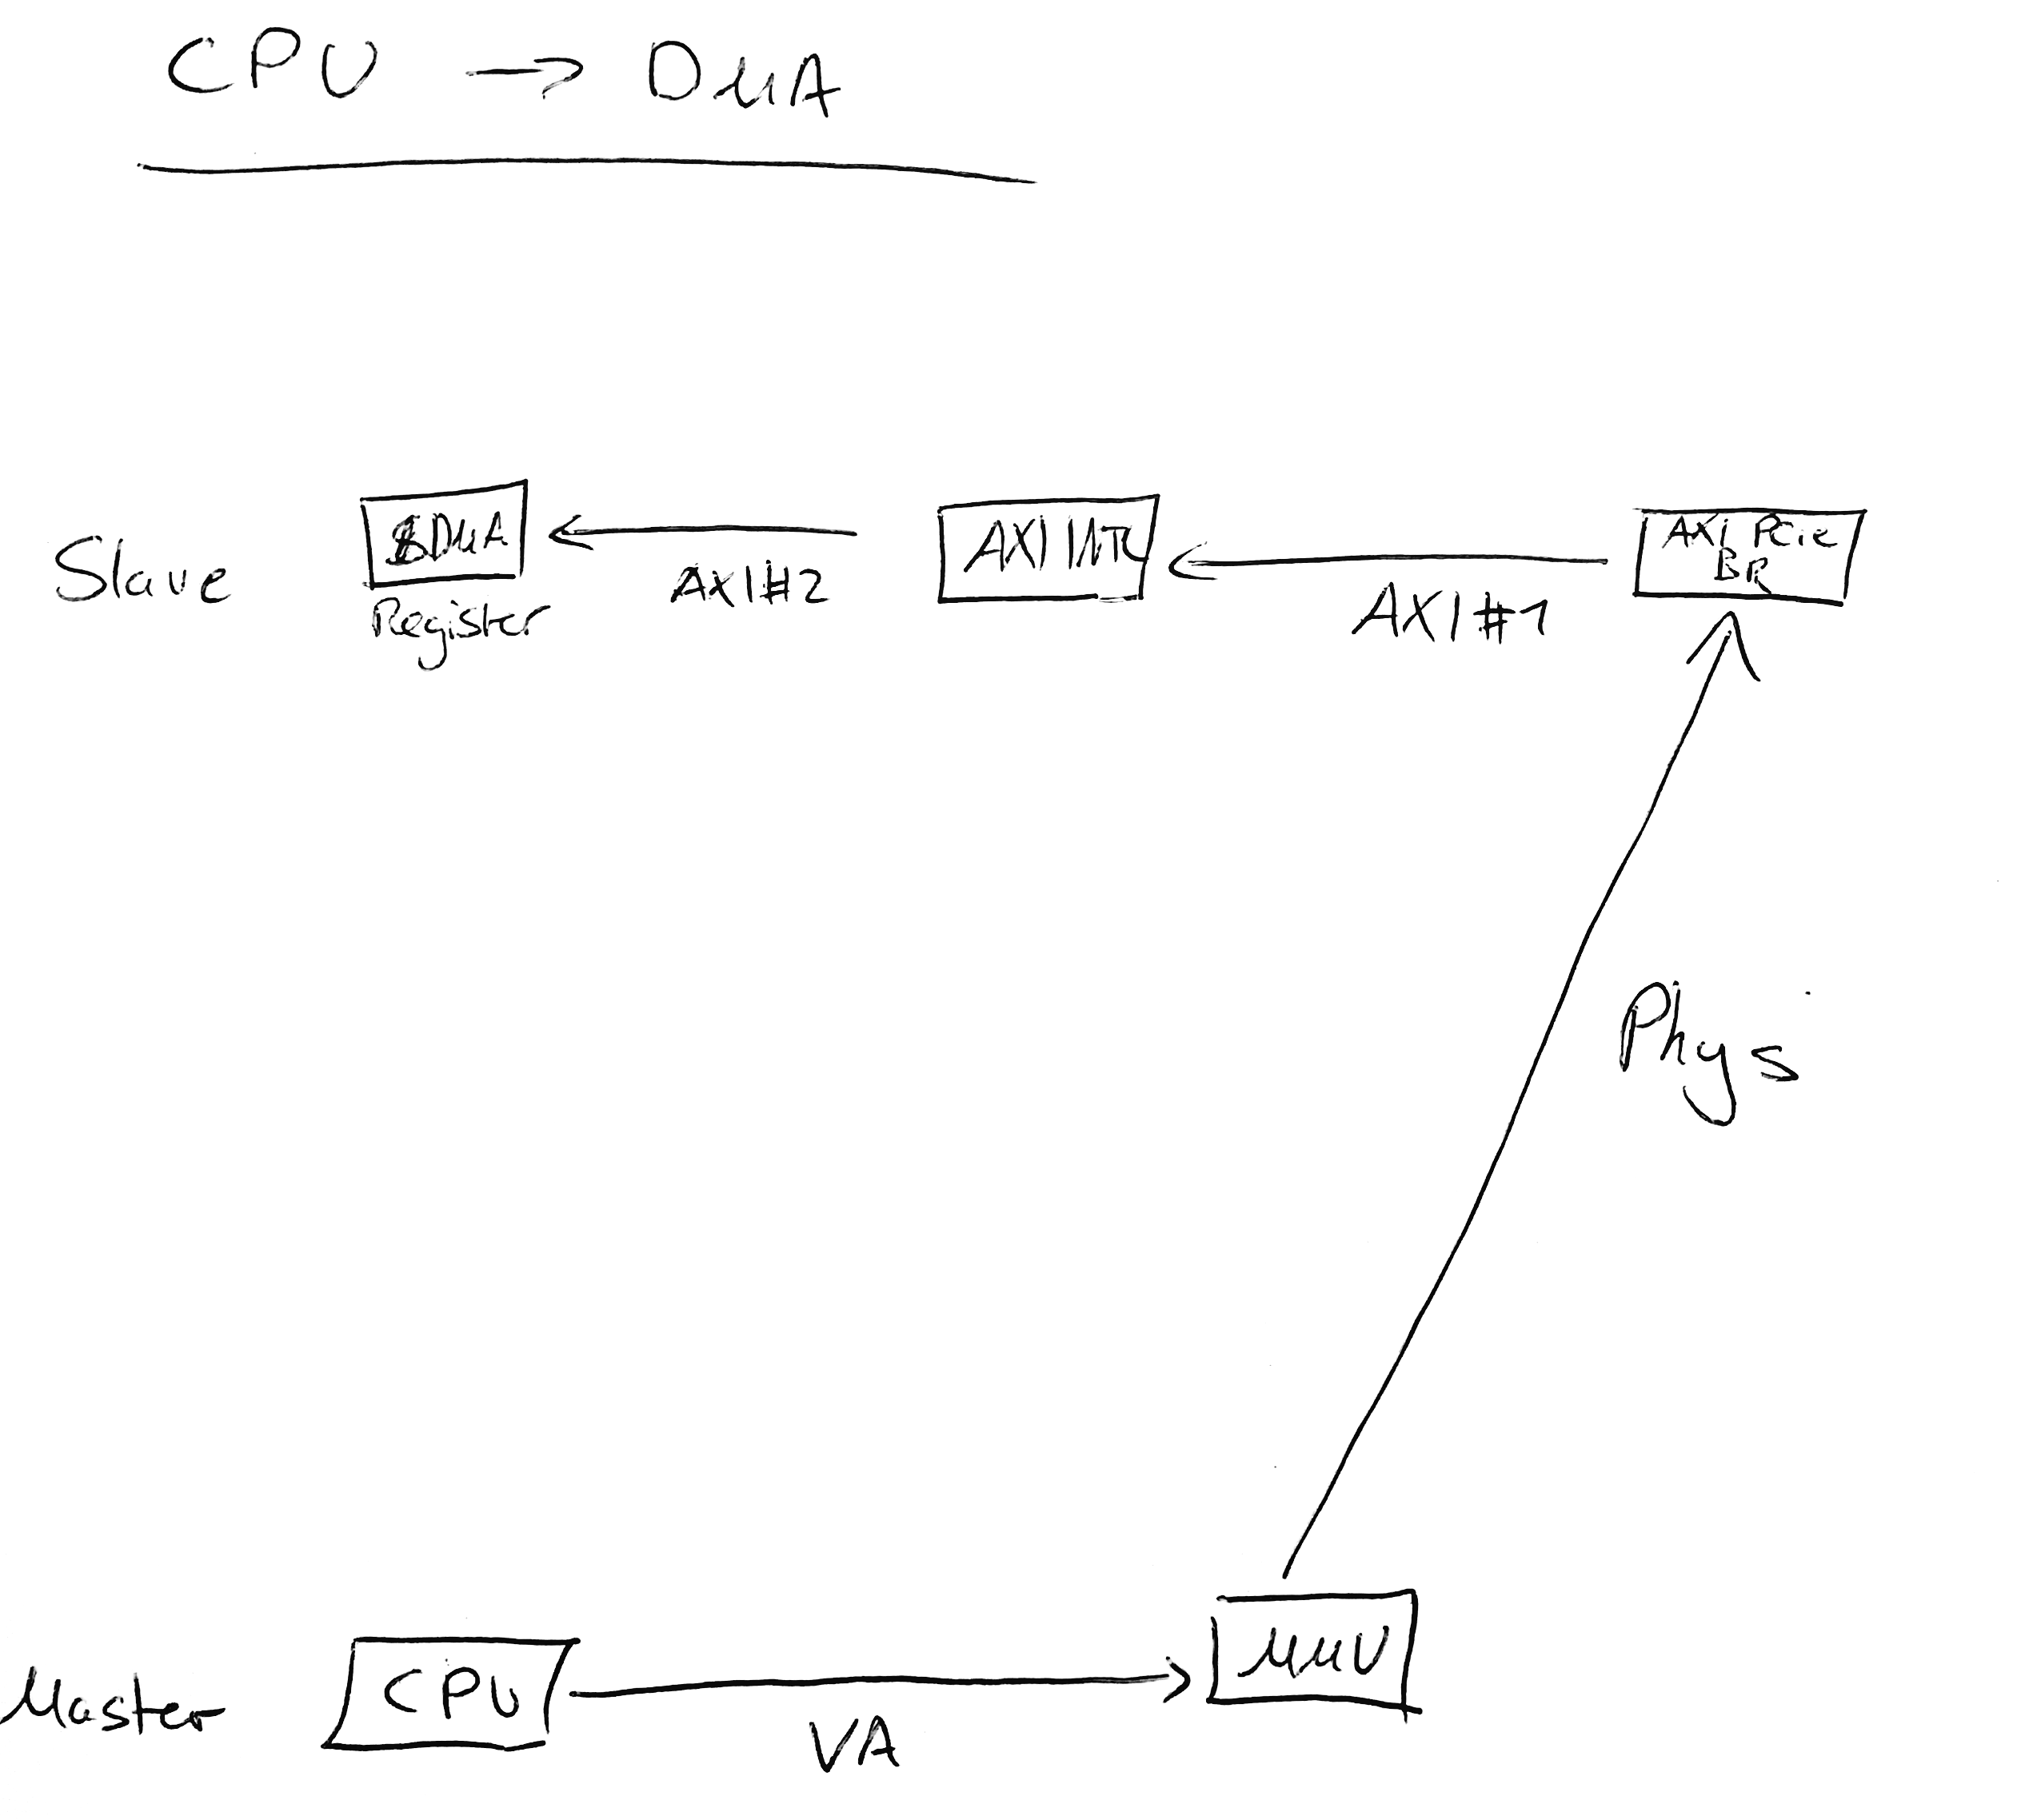 graph_inverted_cpu_dma.png